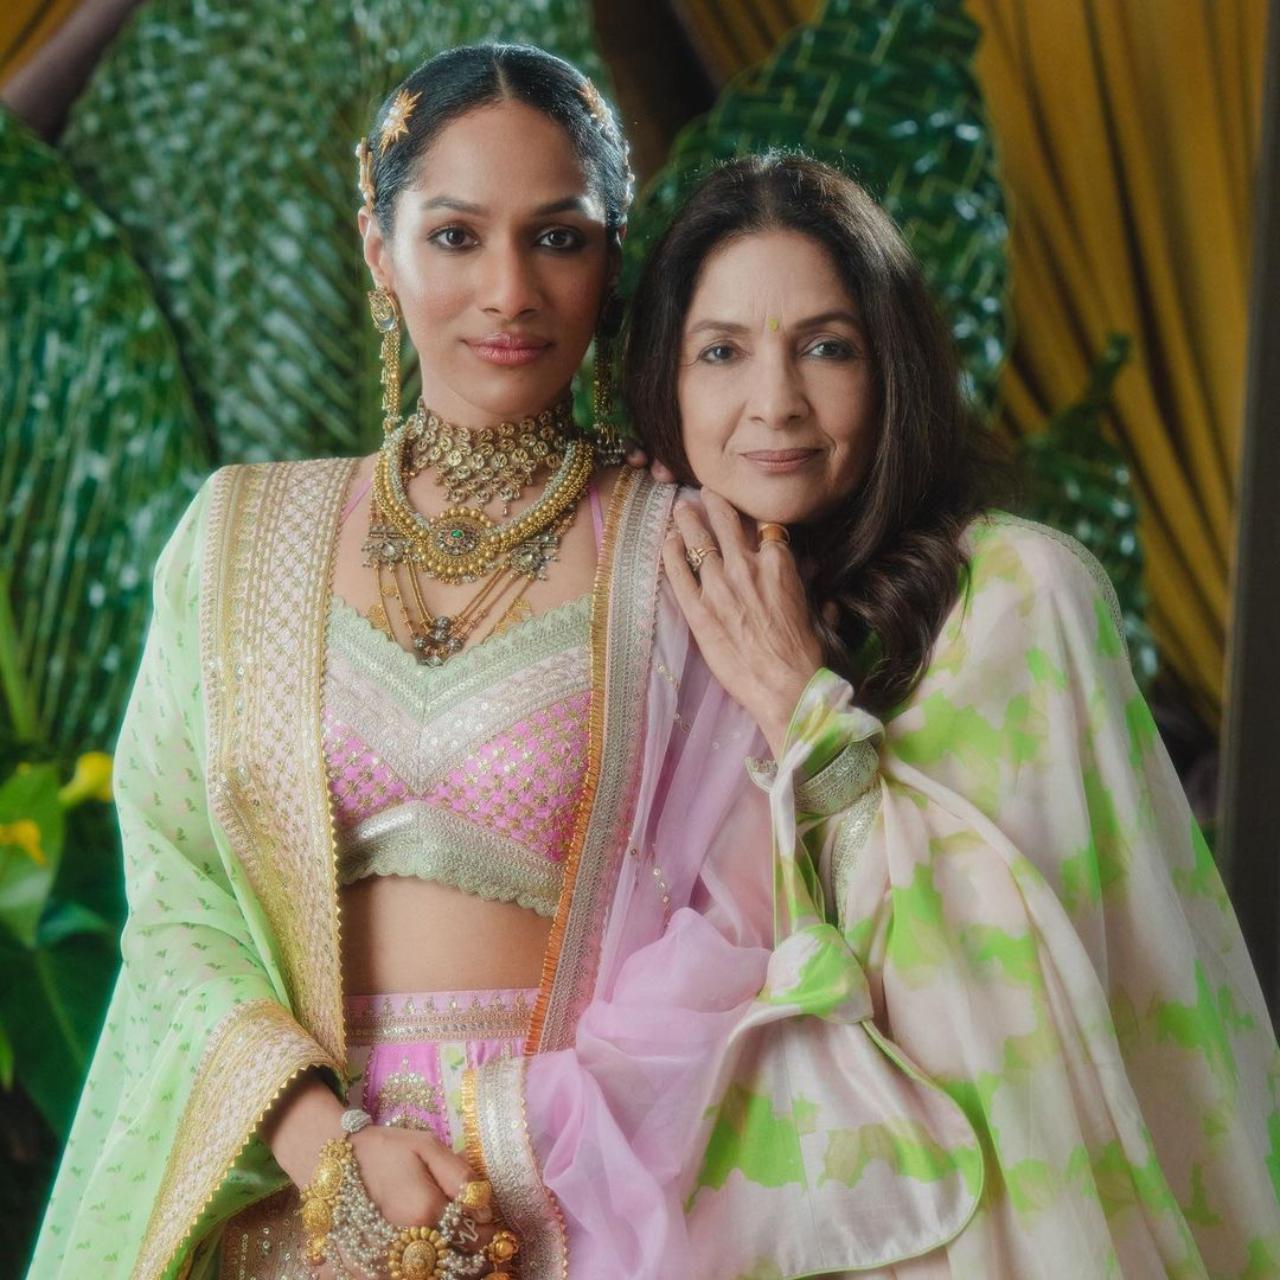 Neena Gupta was dressed in shades of green for her daughter's wedding. After Masaba announced the wedding, Neena Gupta took to her Instagram handle and shared a picture of herself with her daughter in bridal wear and wrote, 